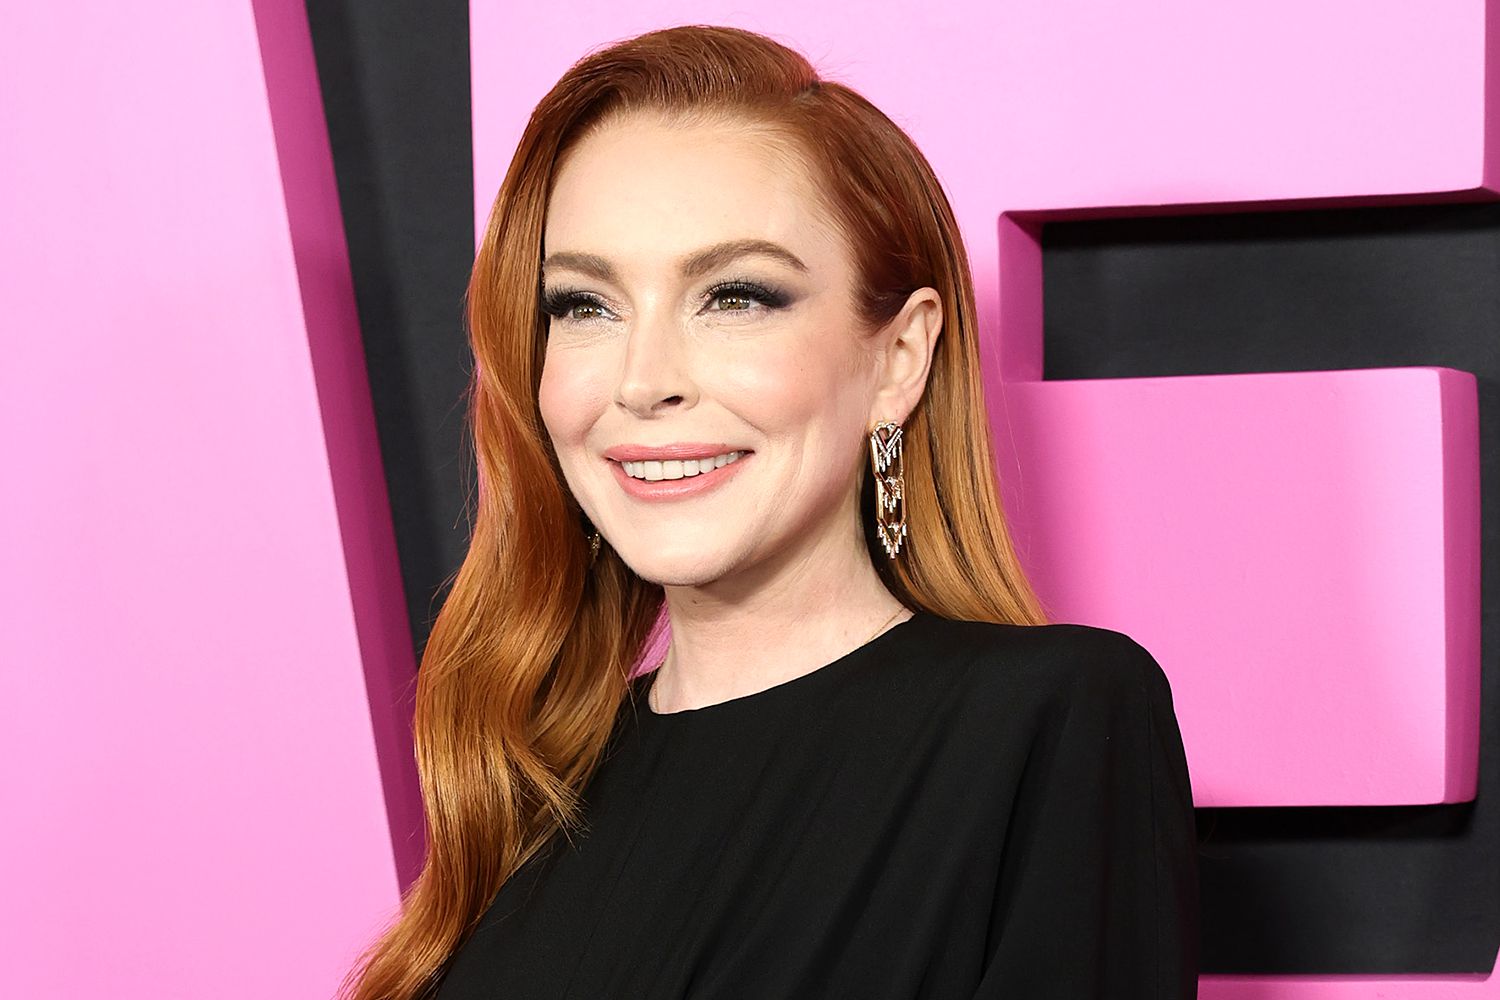 former-mean-girls-star-lindsay-lohan-makes-surprise-cameo-in-foreign-release-of-reboot